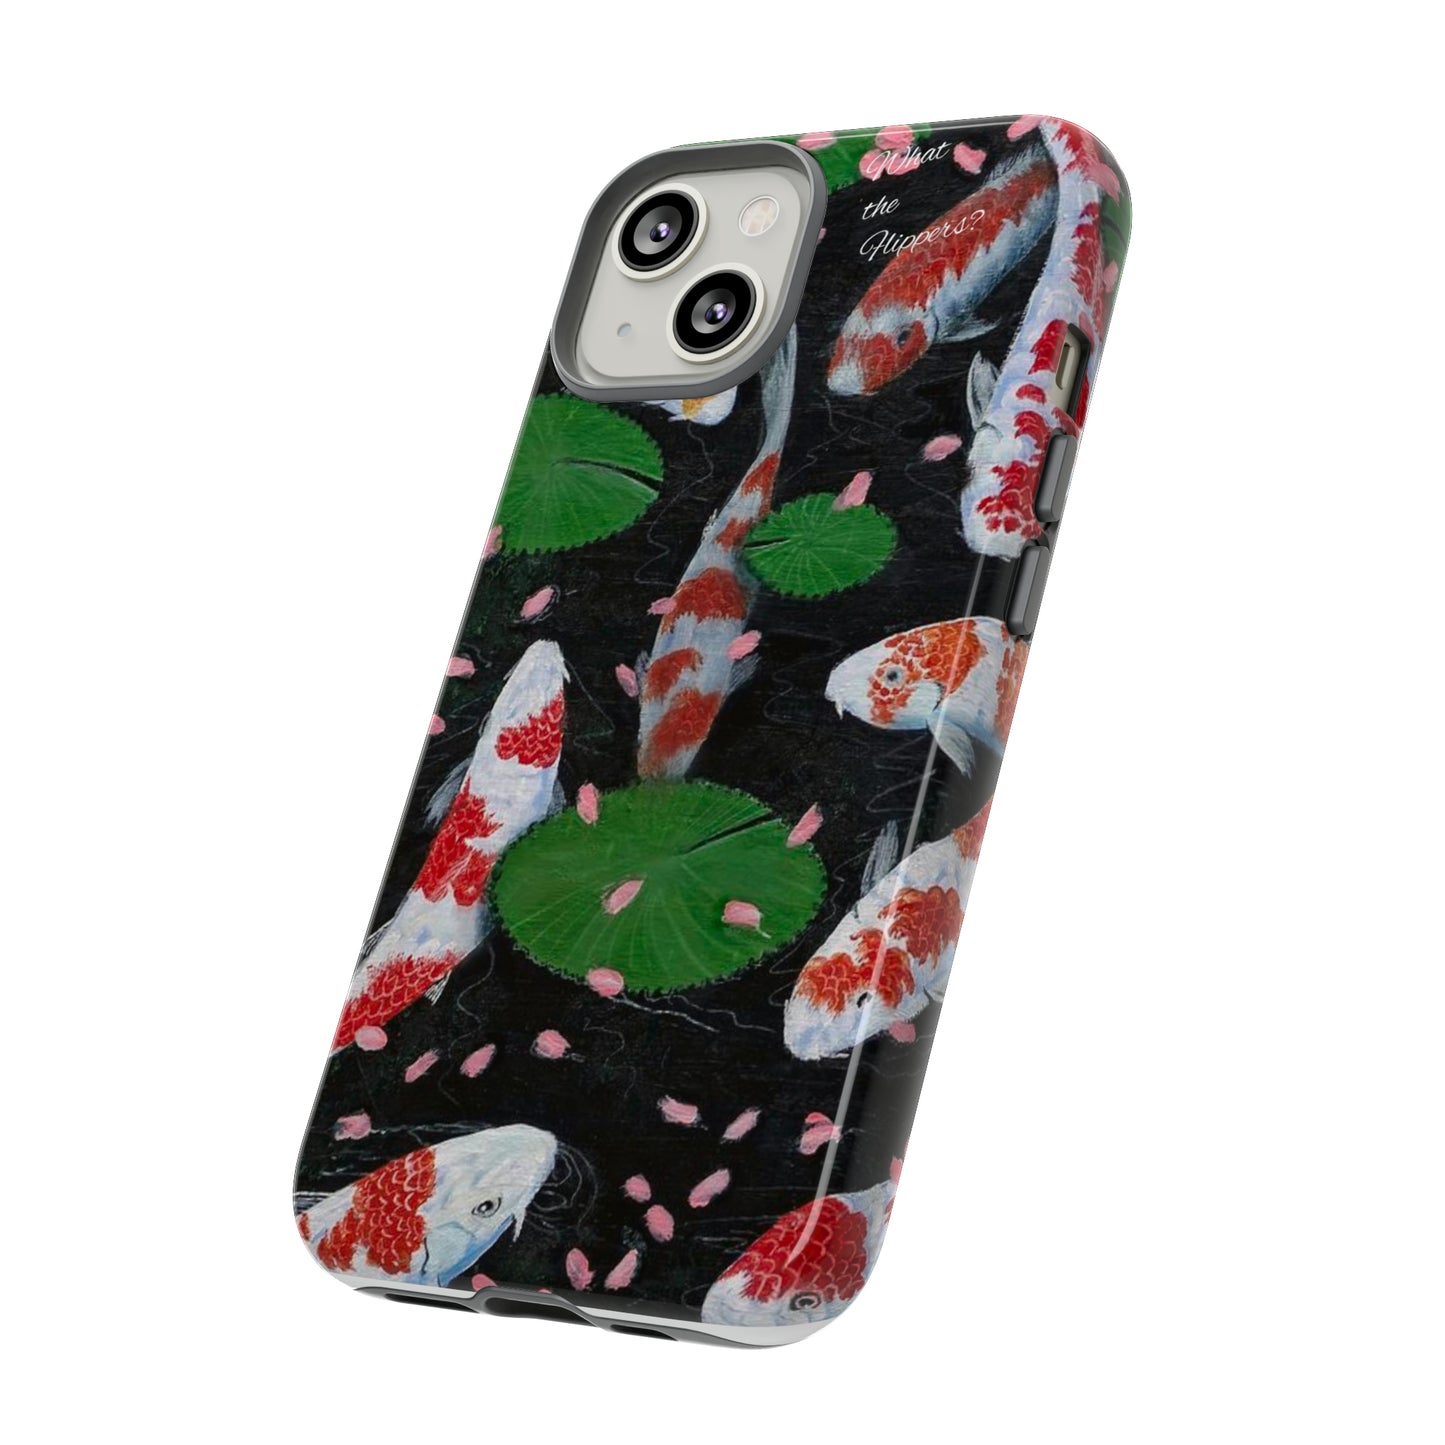 What The Flippers? Phone Case